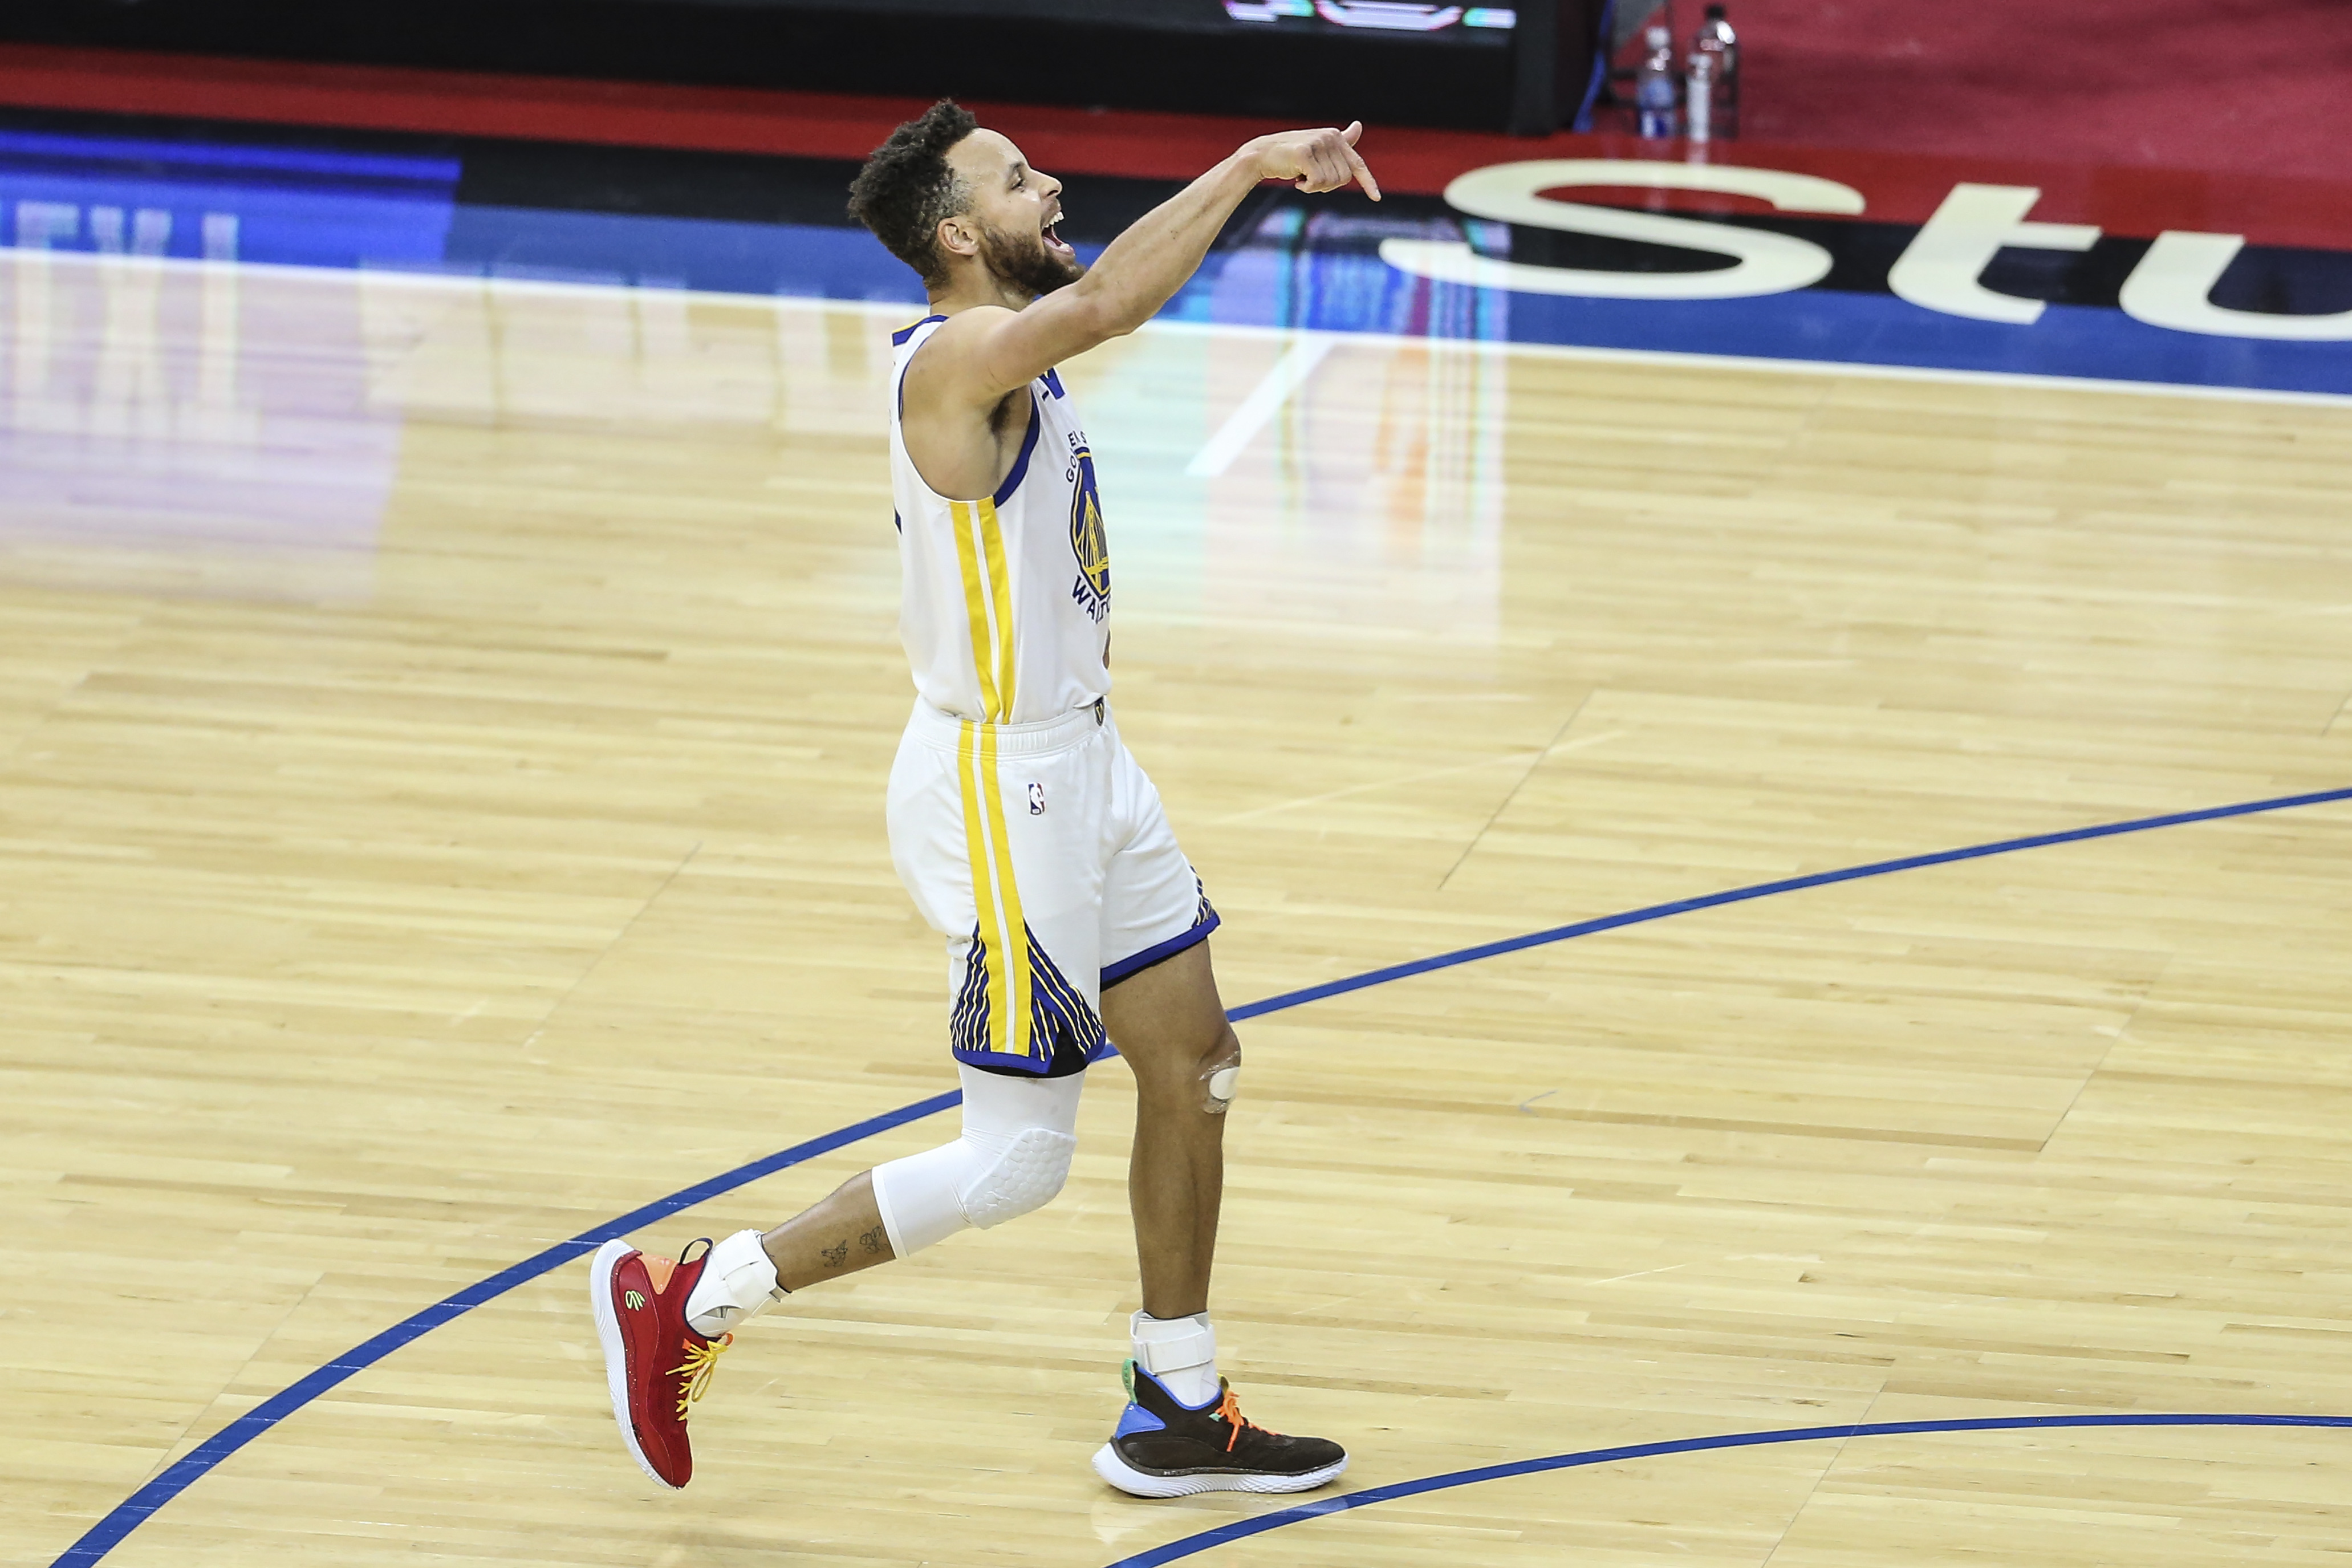 Stephen Curry squandered opportunity for greatness